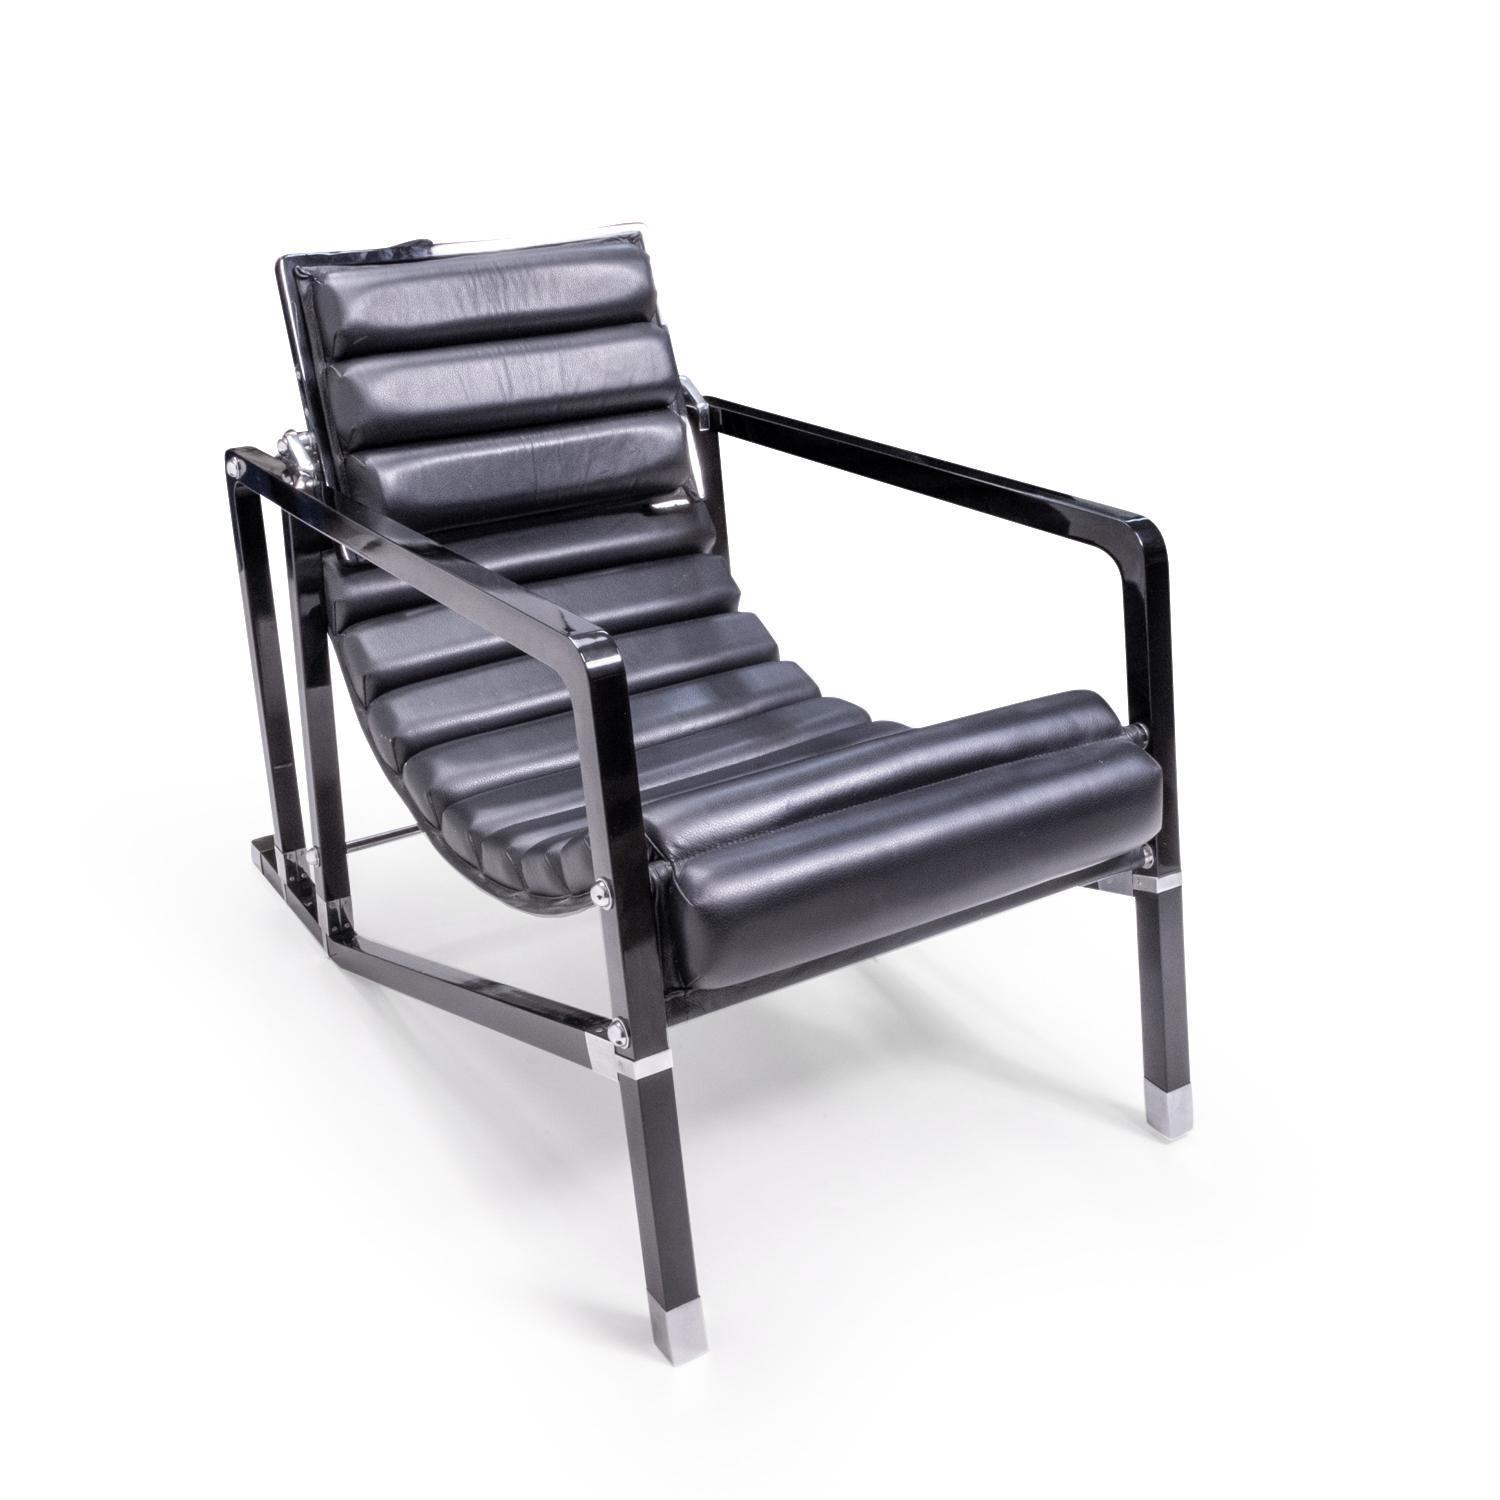 Eileen Gray Transat Lounge Chair In Good Condition For Sale In Bern, CH